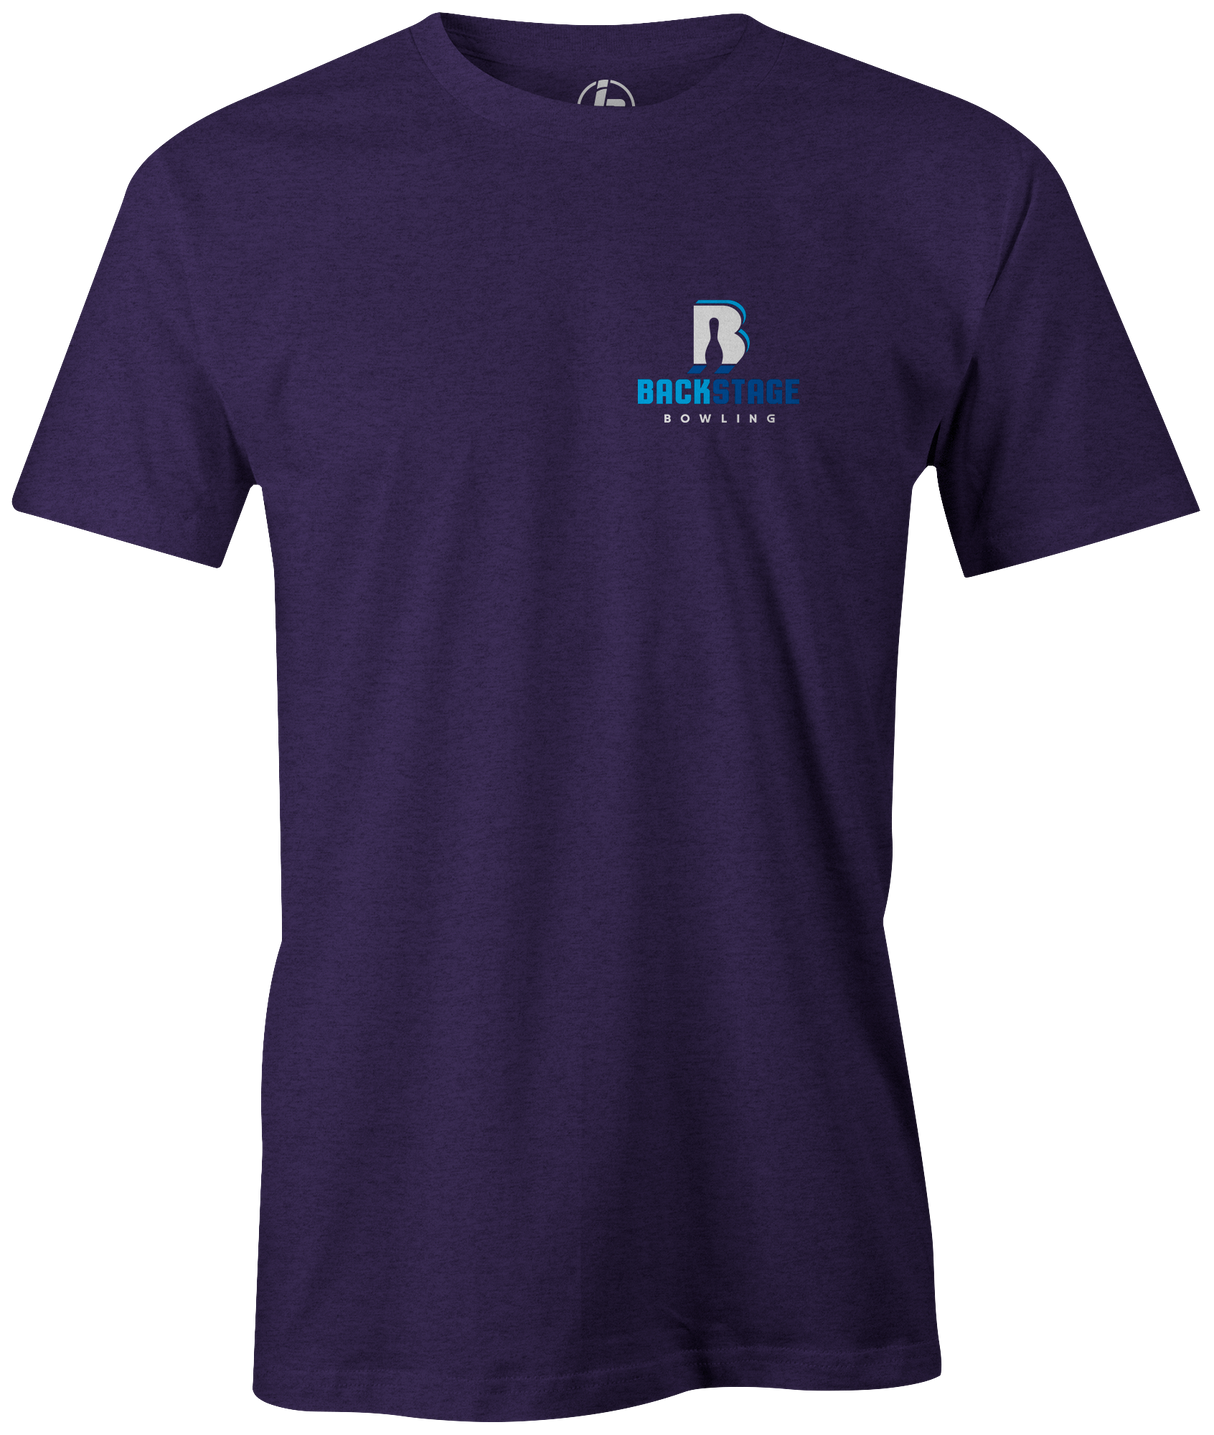 Backstage Bowling T-shirt, men's, purple, tee, tee-shirt, t shirt, apparel, merch, practice, lanes, free shipping, discount, cheap, coupon, shannon o'keefe, bryan o'keefe, mike jasnau, mike shady, coaching, membership, cool, vintage, authentic, original